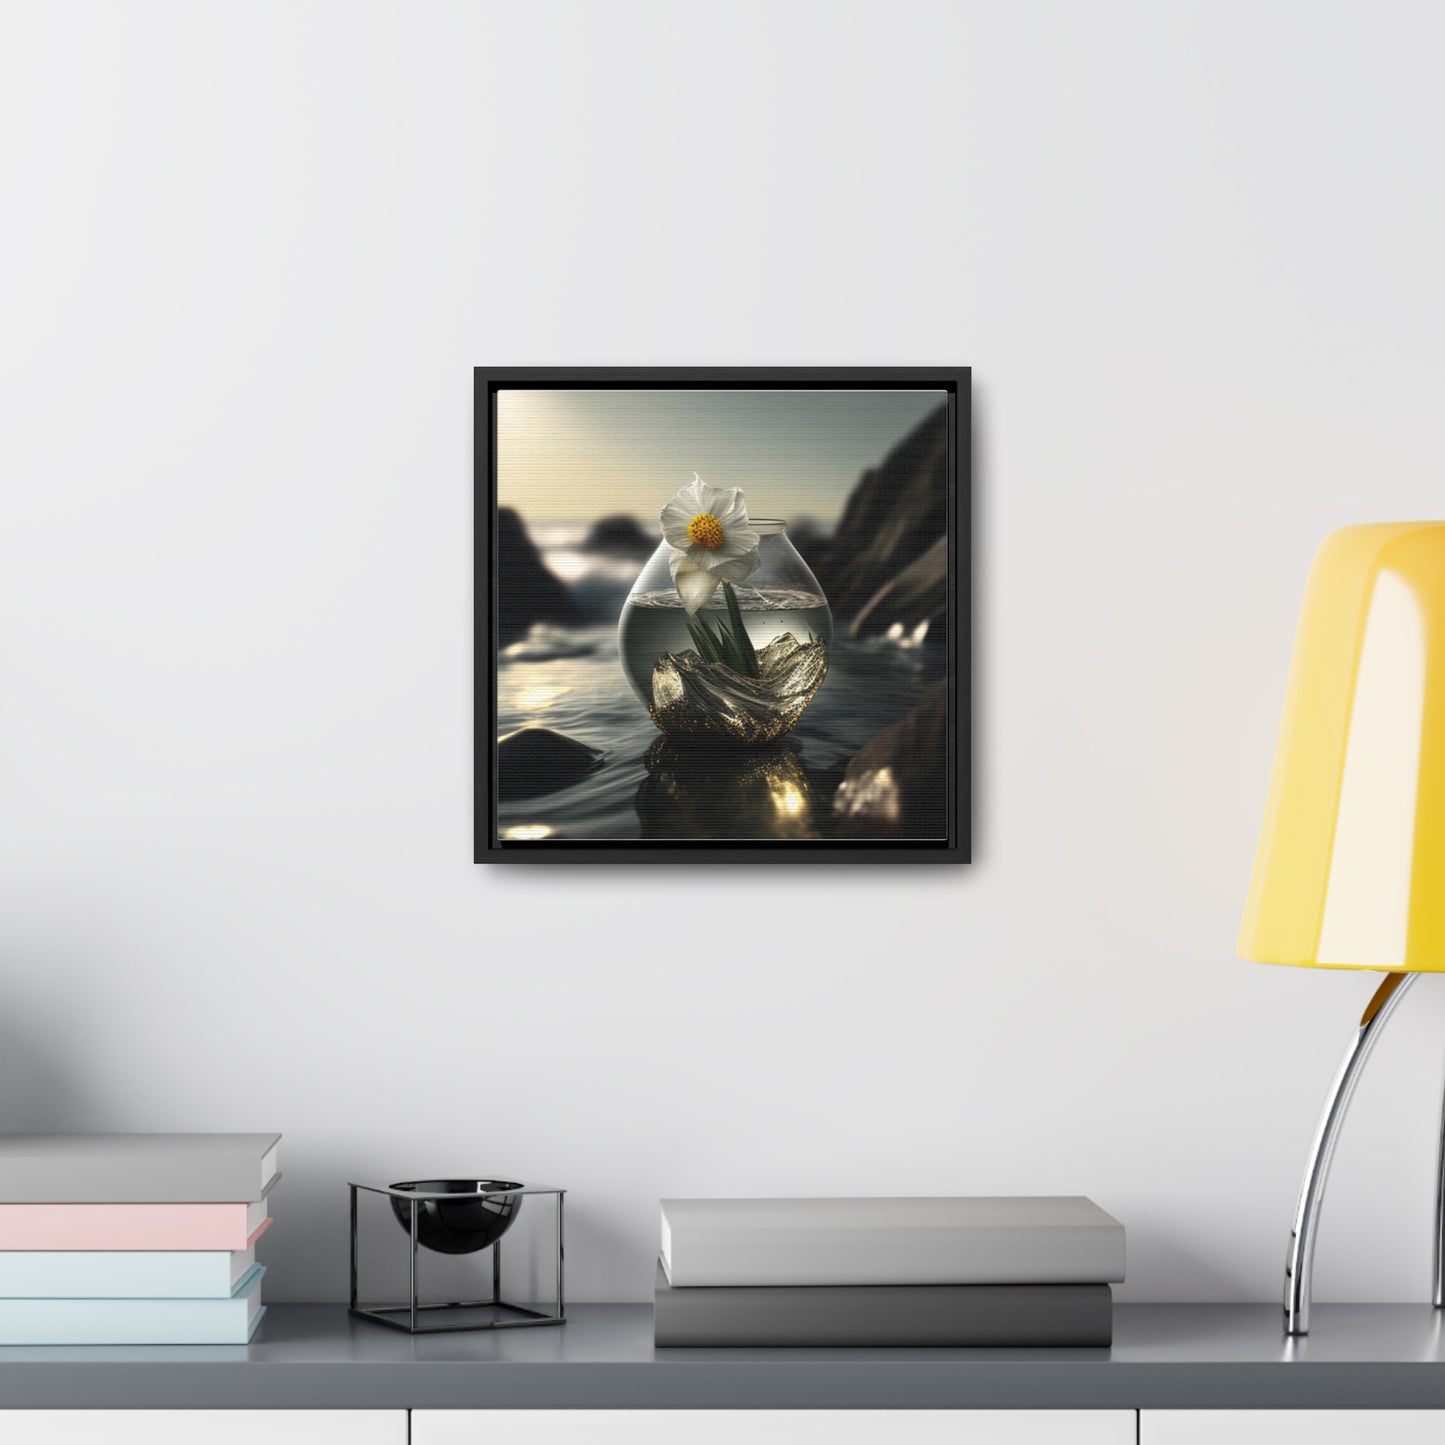 Gallery Canvas Wraps, Square Frame Daffodil 1